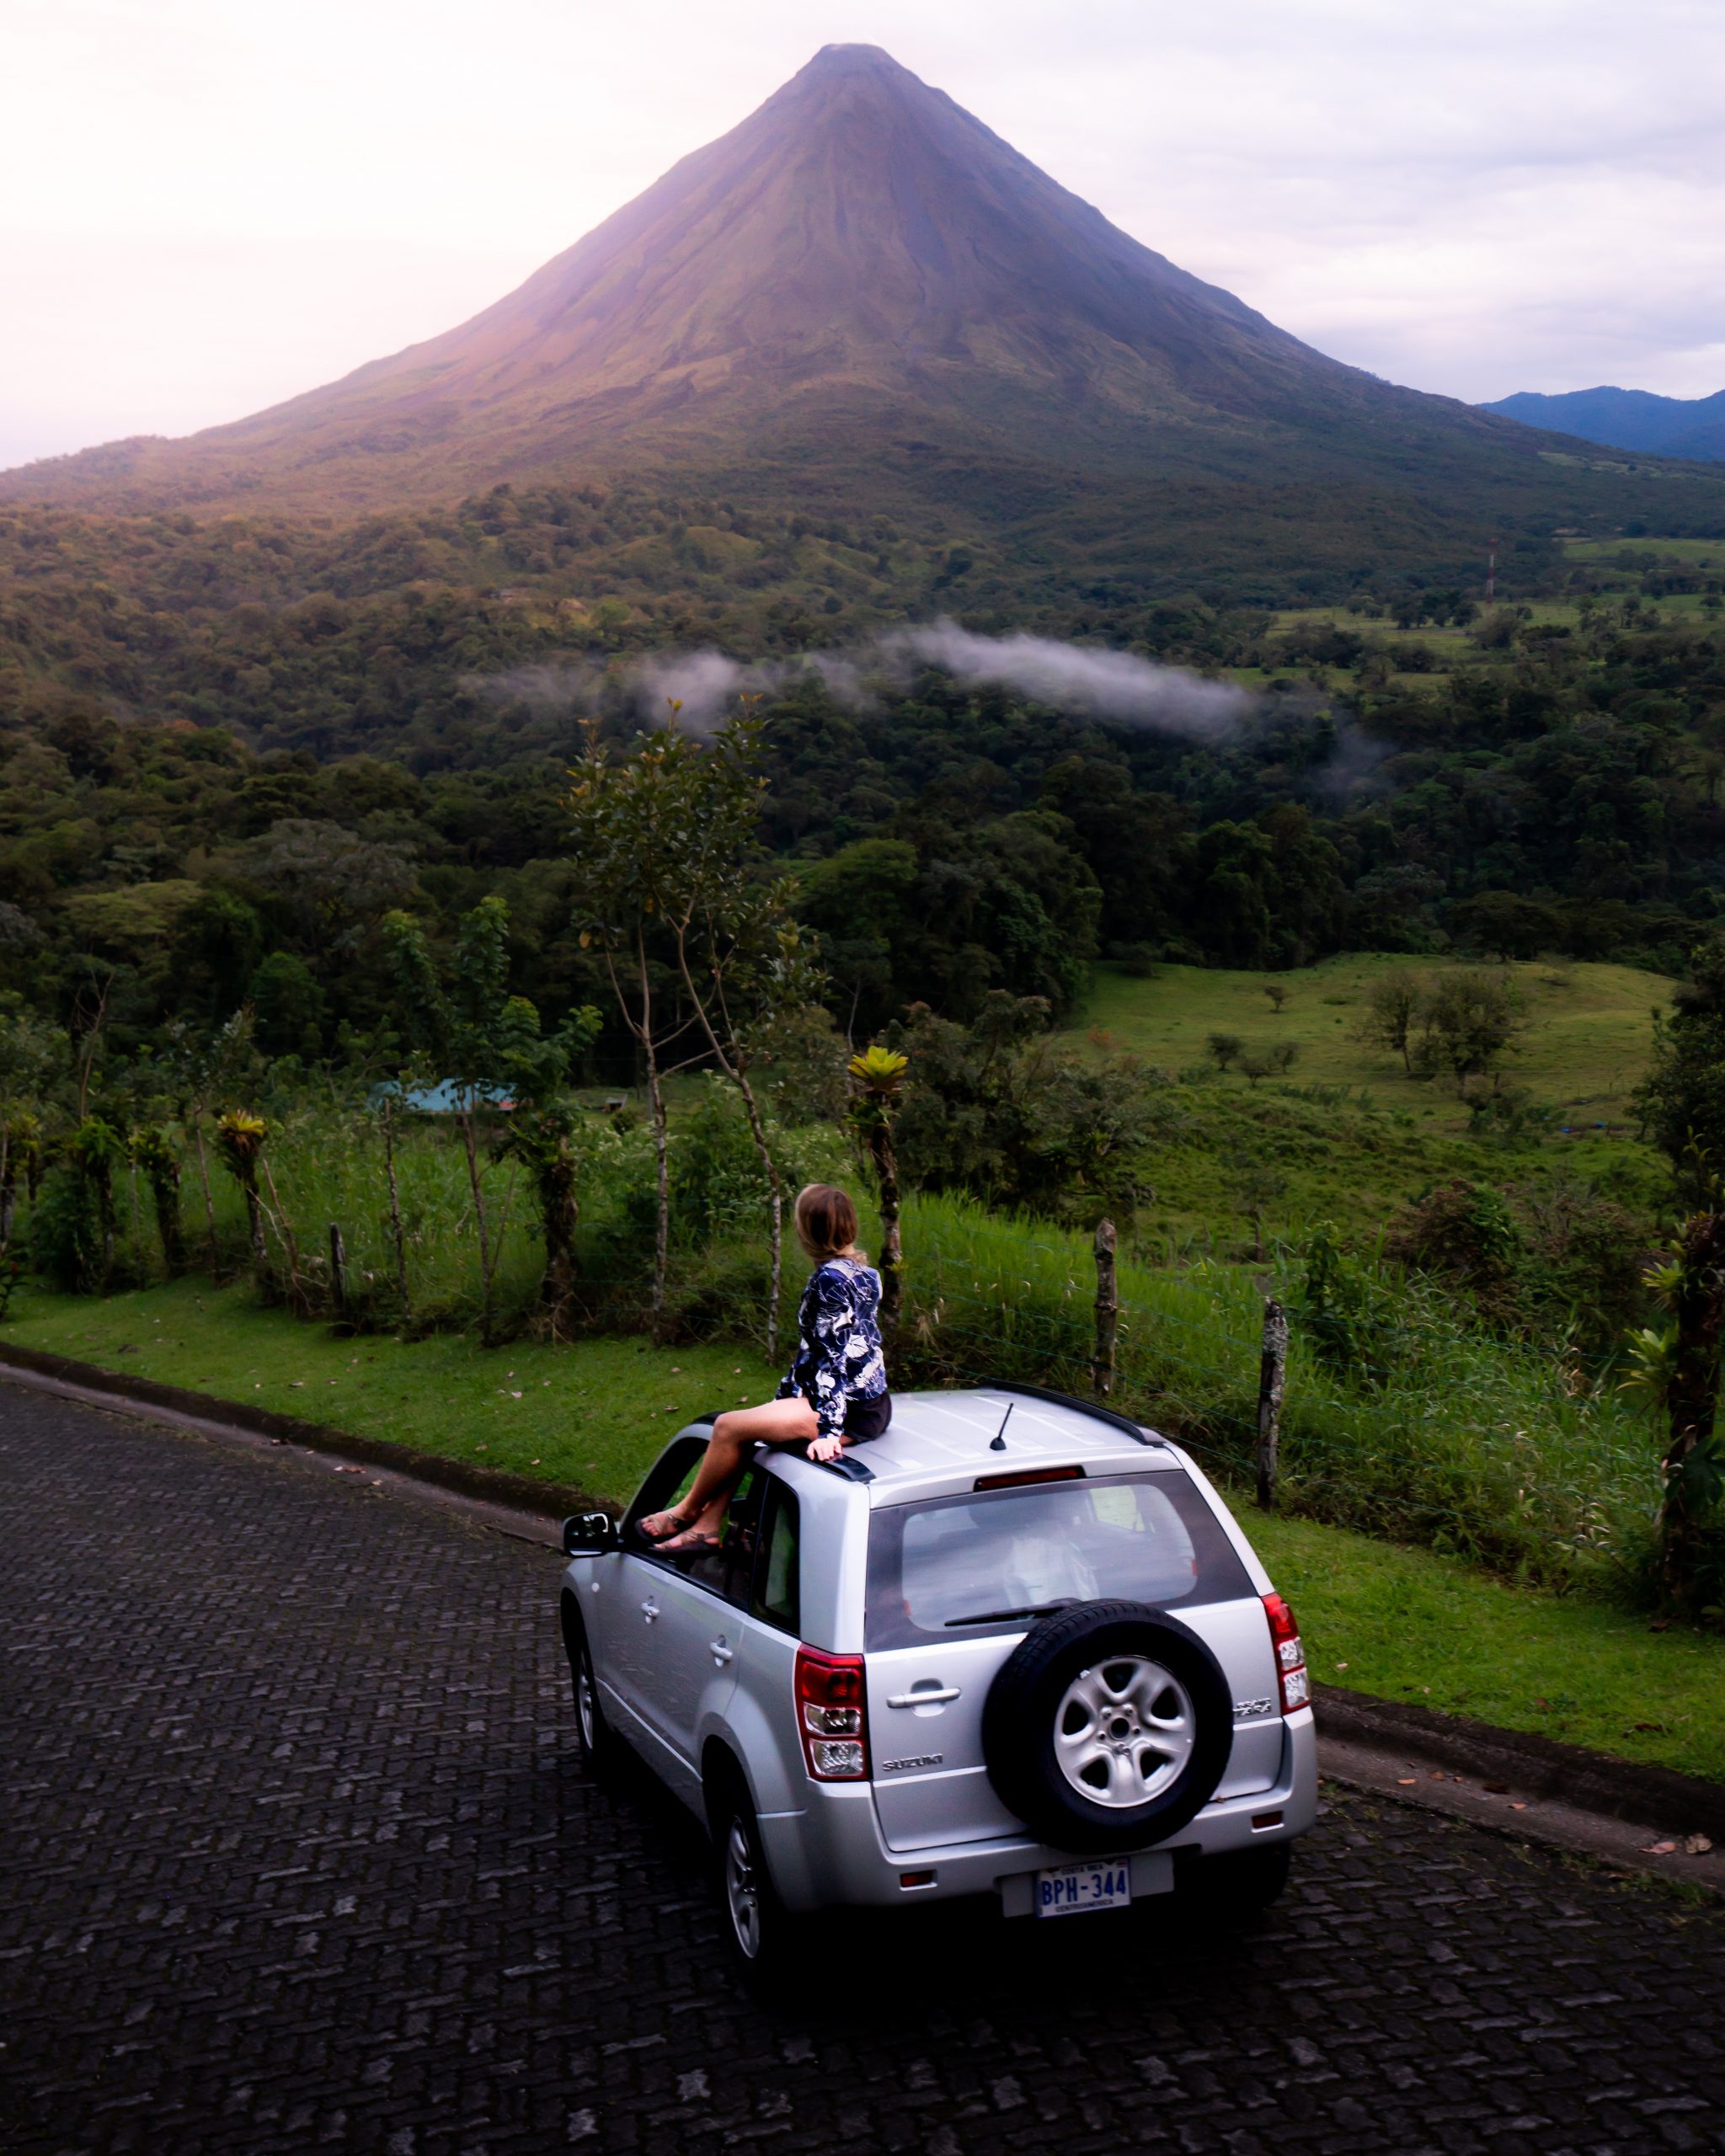 How To Get From Tamarindo To La Fortuna - All Possible Ways, cheapest way from Tamarindo to La Fortuna, Tamarindo to La Fortuna, Tamarindo Costa Rica to La Fortuna, Tamarindo to La Fortuna, Tamarindo costa rica to La Fortuna, Tamarindo to La Fortuna, Tamarindo to La Fortuna bus